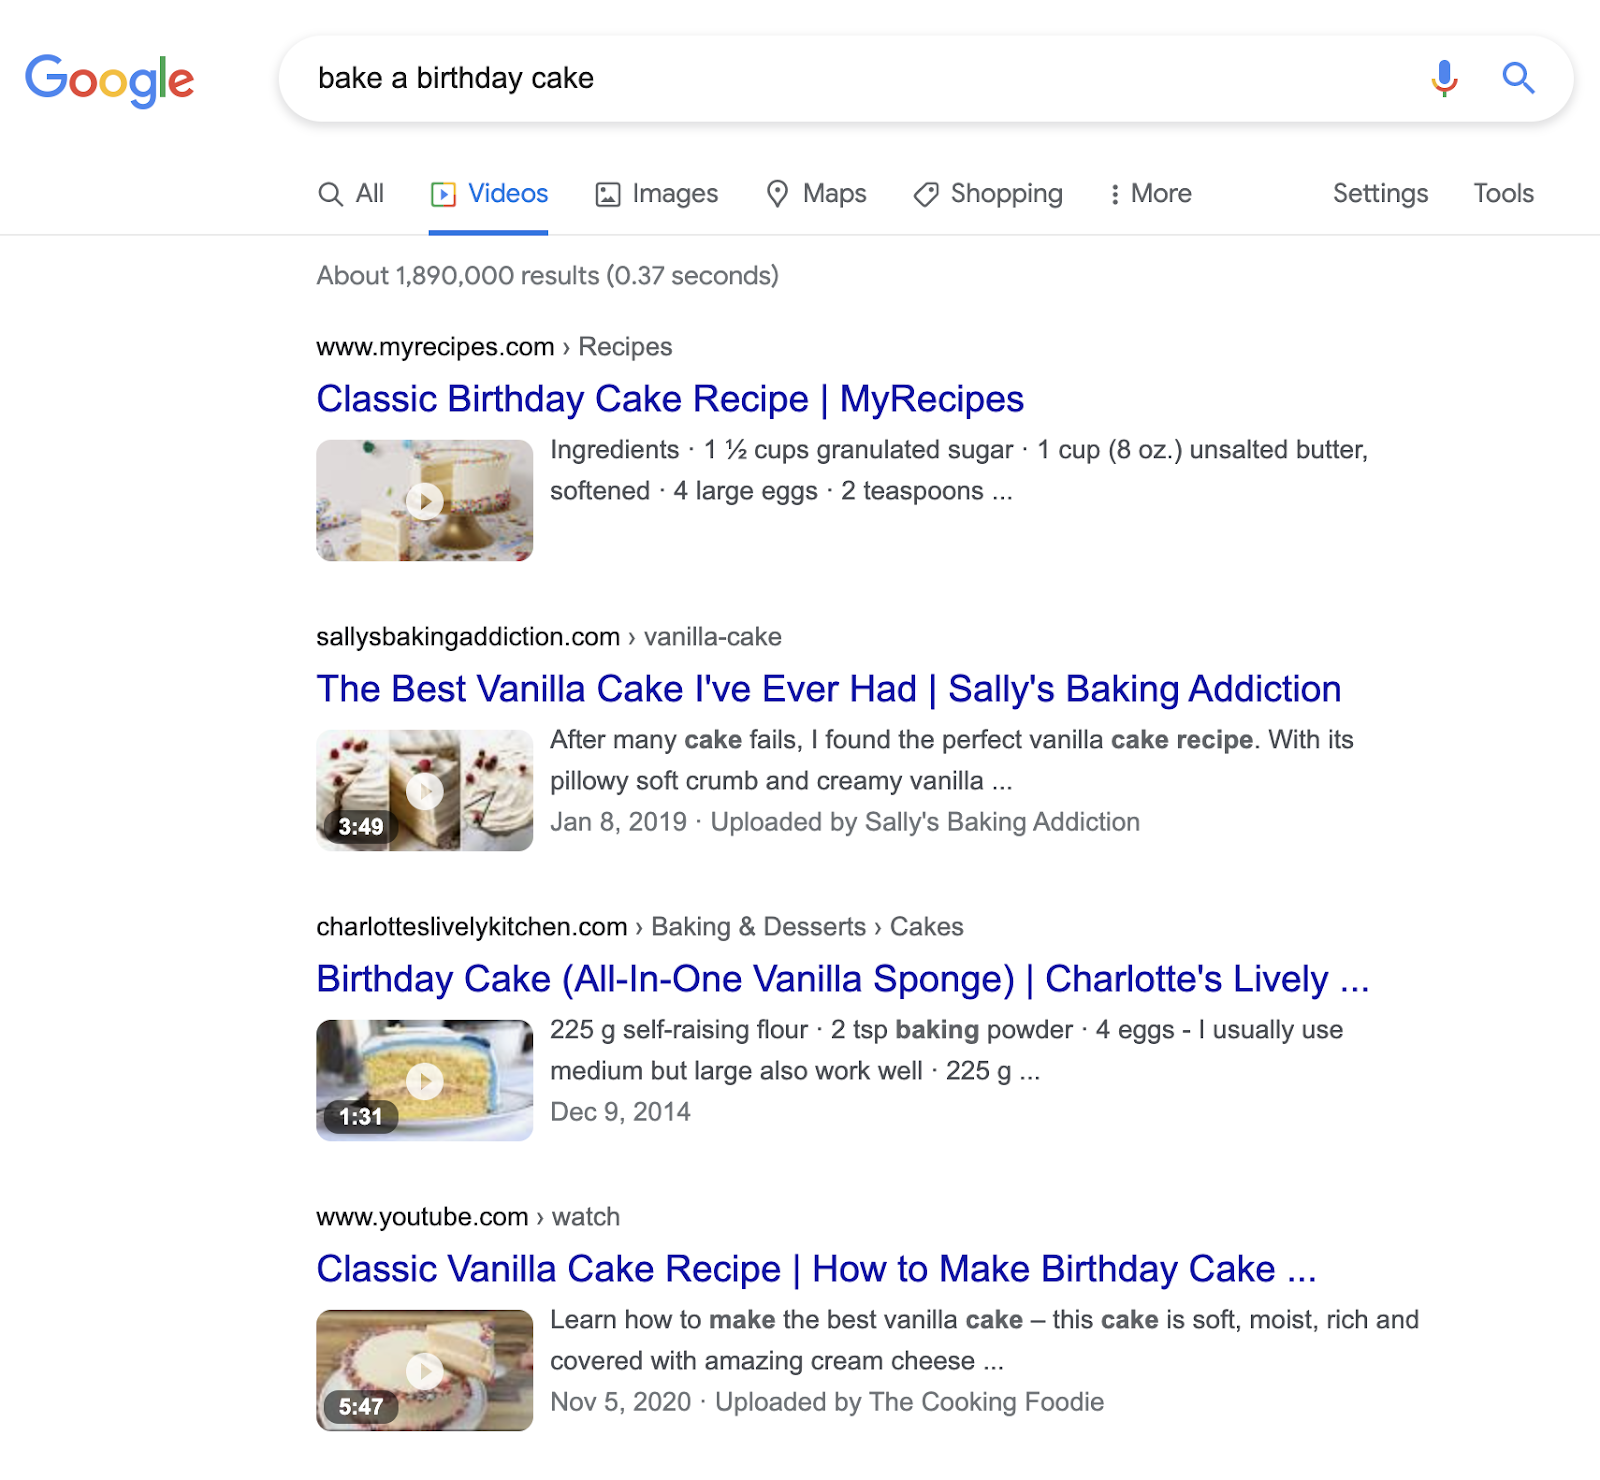 Google video search results for bake a birthday cake.